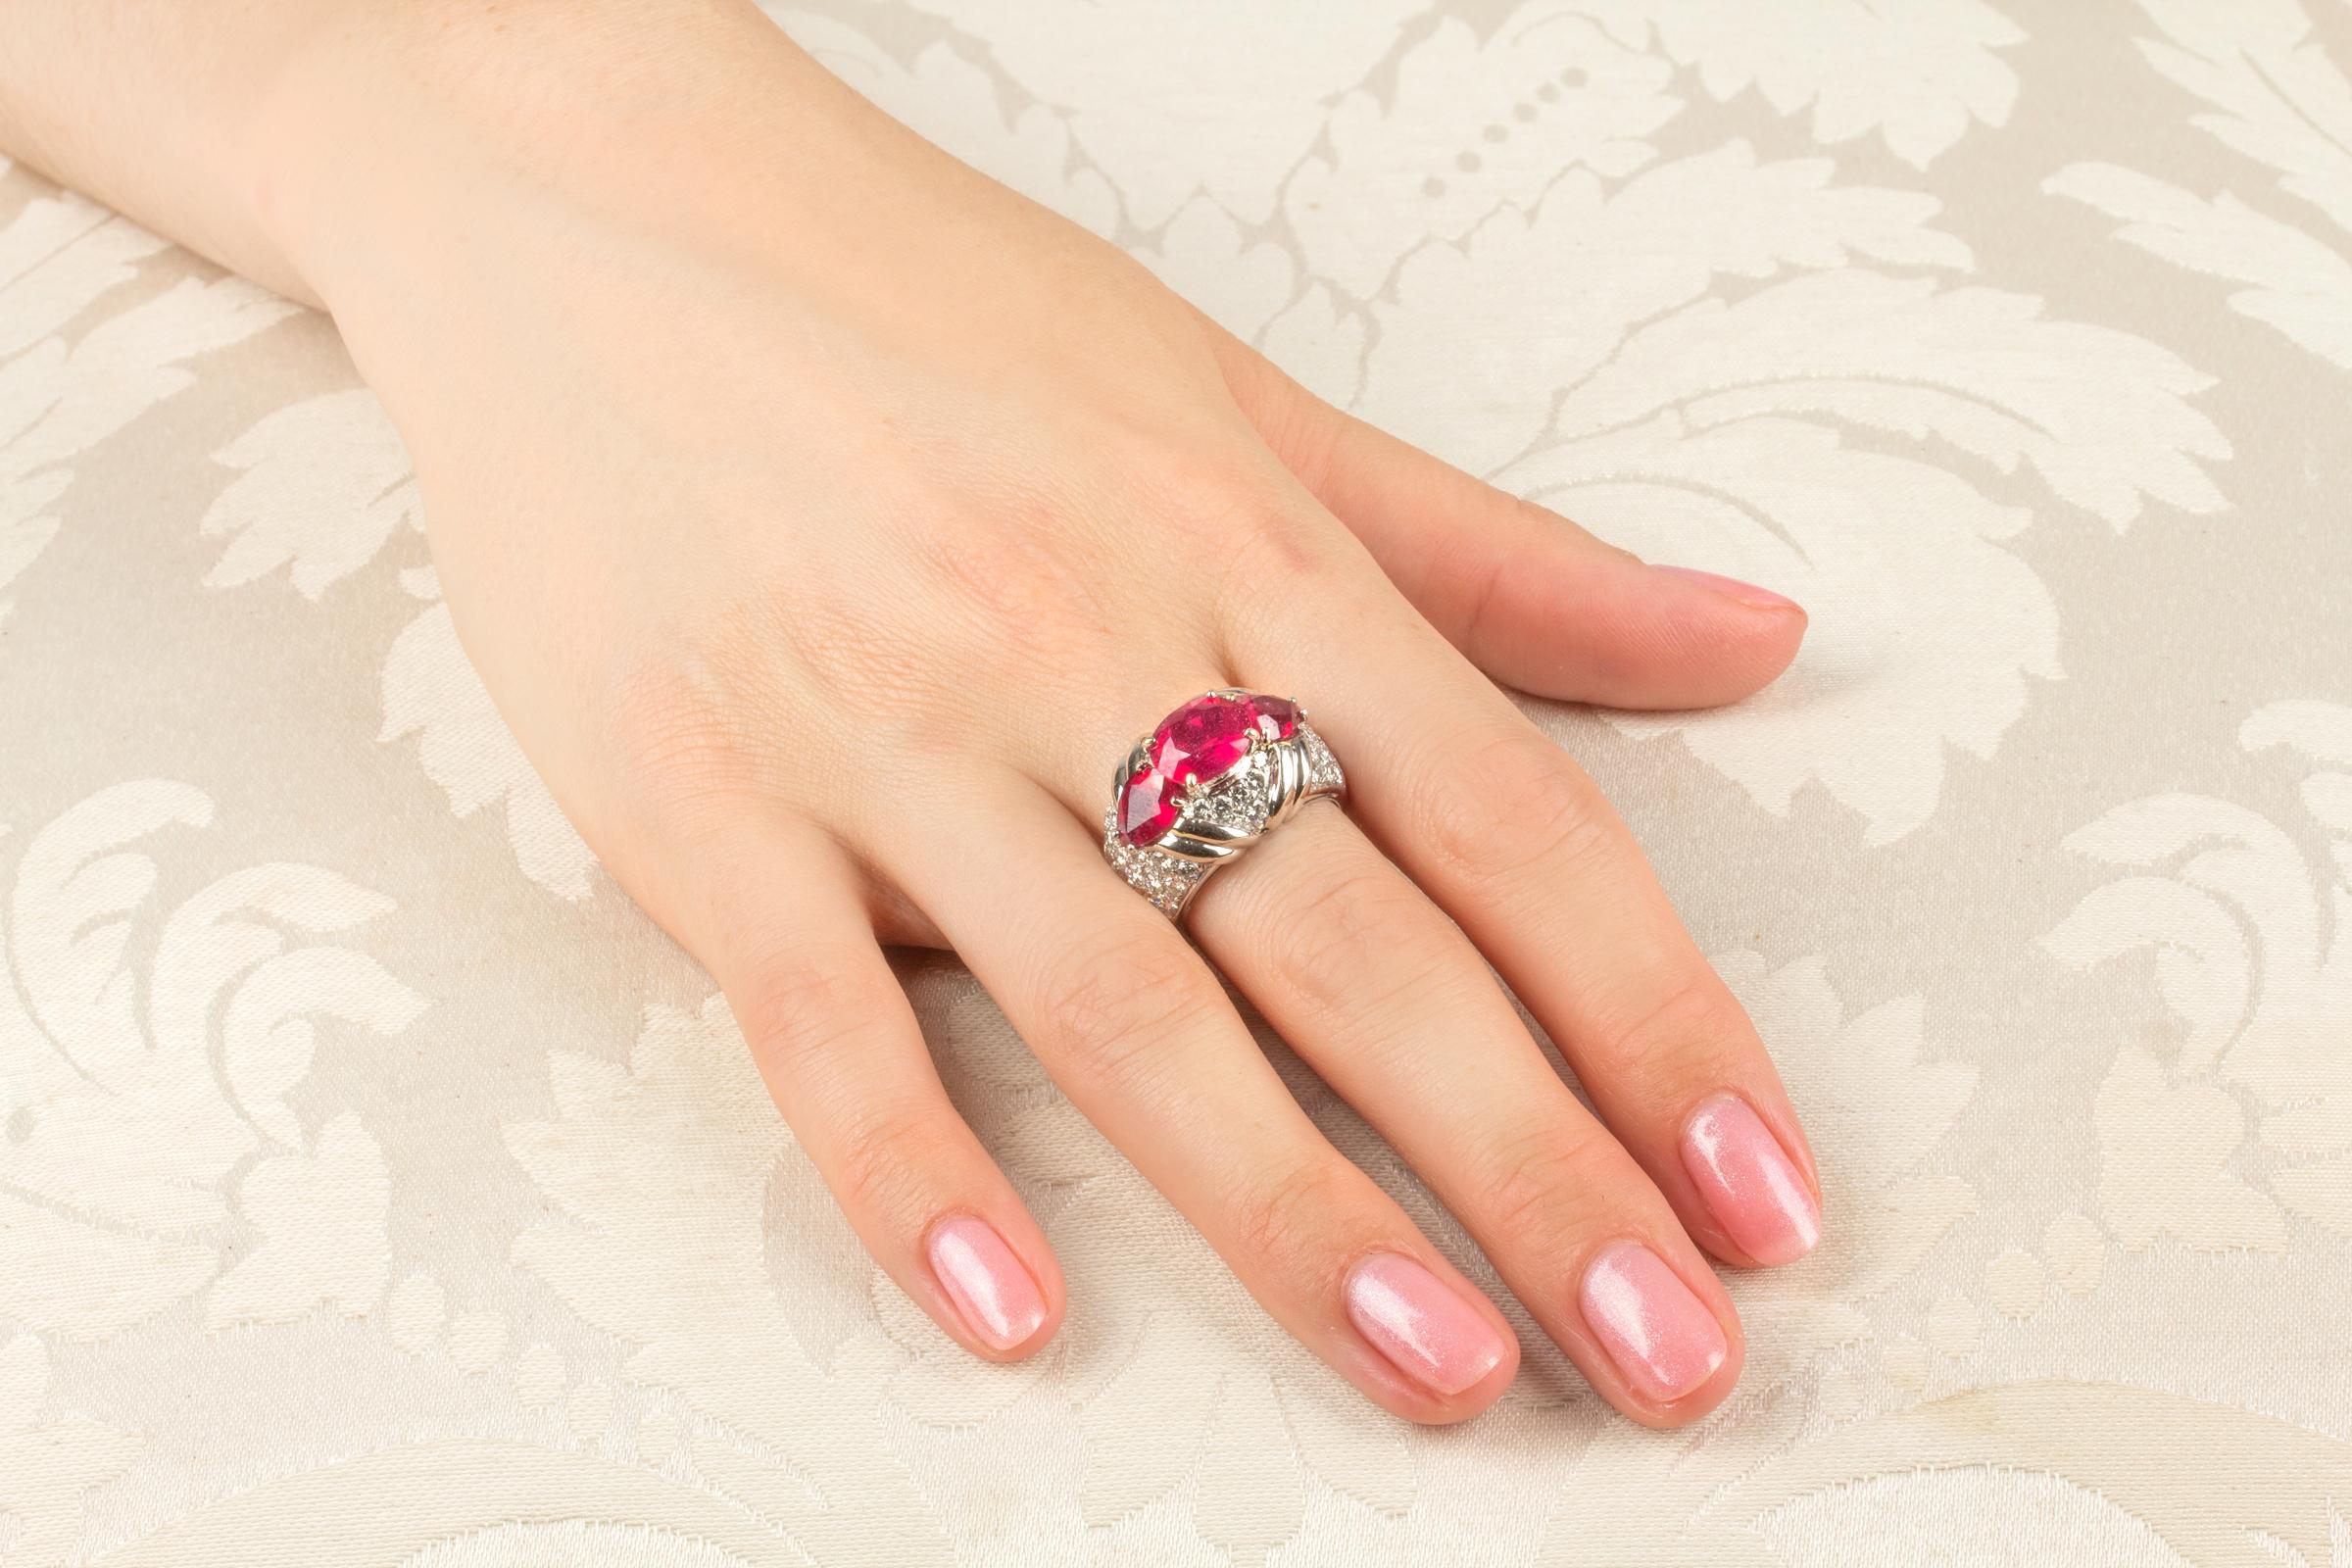 This ruby and diamond cocktail ring features 3 faceted oval-cut rubies (4.29 carats total) in a design of pavé set round diamonds (1.79 carats) with white gold accents. The diamonds are of top quality (color, clarity and cut). 
The ring is